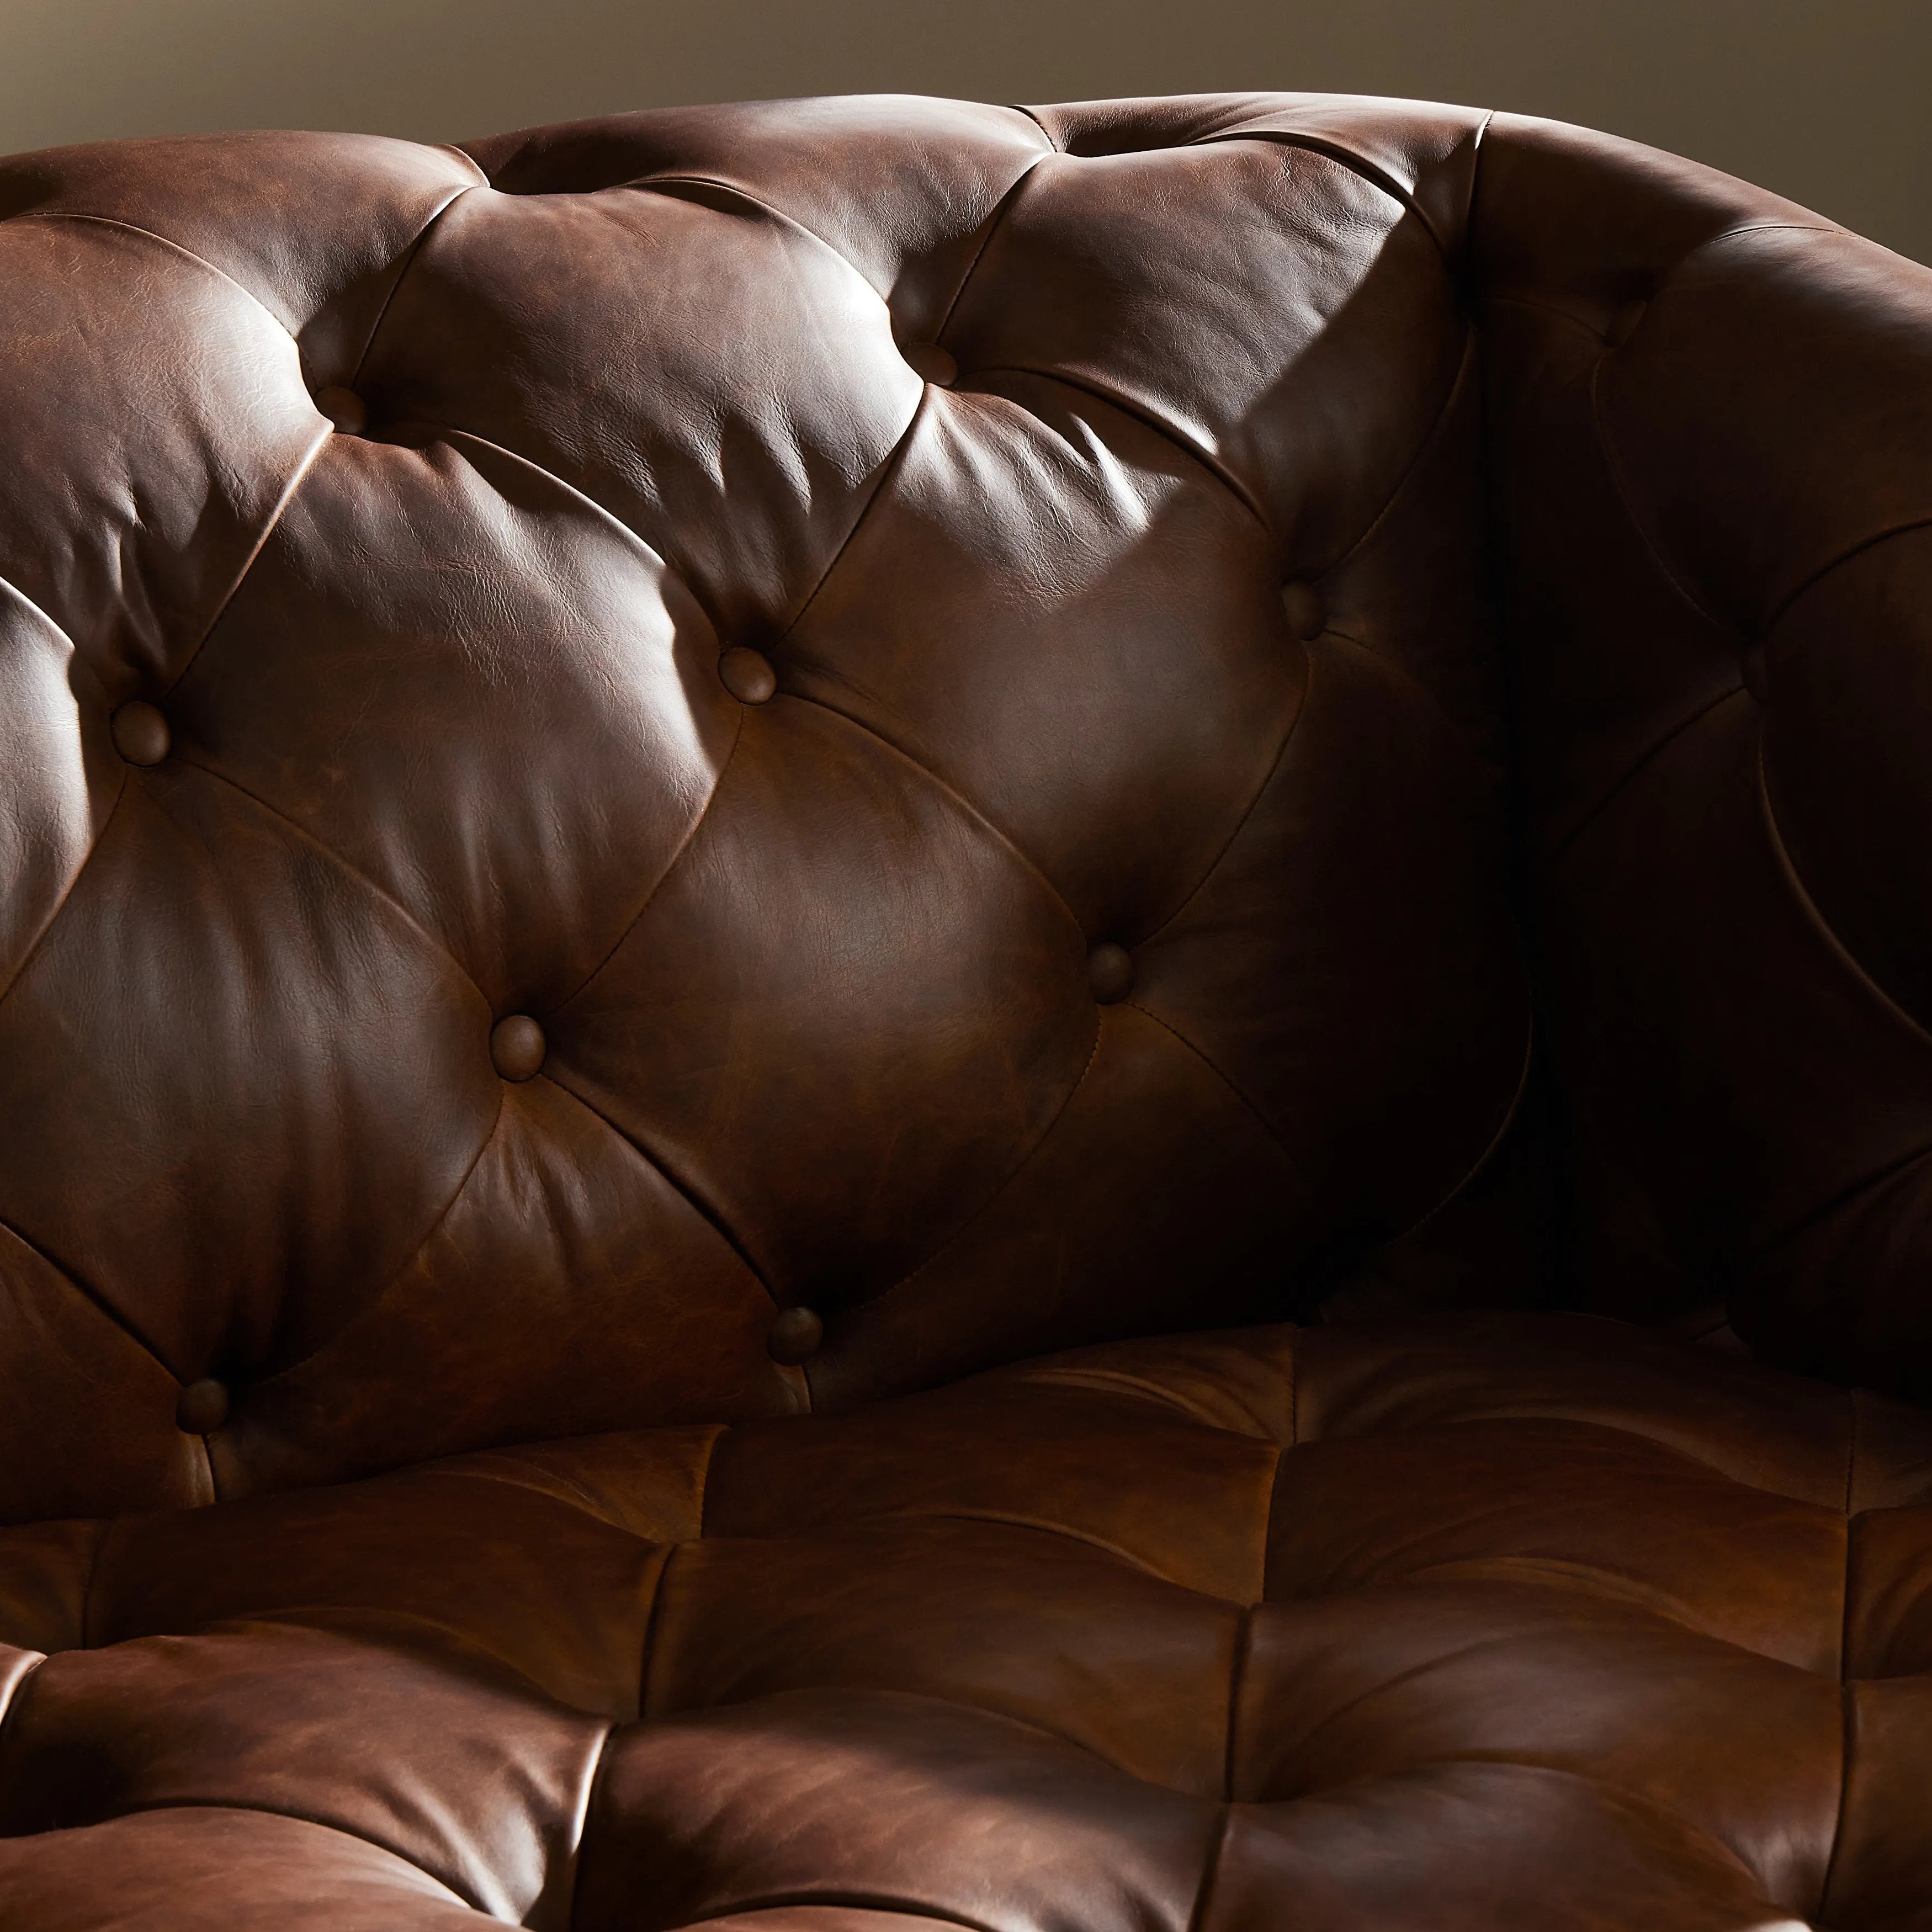 An Old English-inspired design is updated with button tufting across the back and arms. Upholstered in a top-grain leather finished with a soft hand for a vintage, lived-in look on this traditionally inspired sofa. Handcrafted in Italy, the richness of this distinctive, full-bodied leather develops an even-richer patina over time. Amethyst Home provides interior design, new home construction design consulting, vintage area rugs, and lighting in the Salt Lake City metro area.